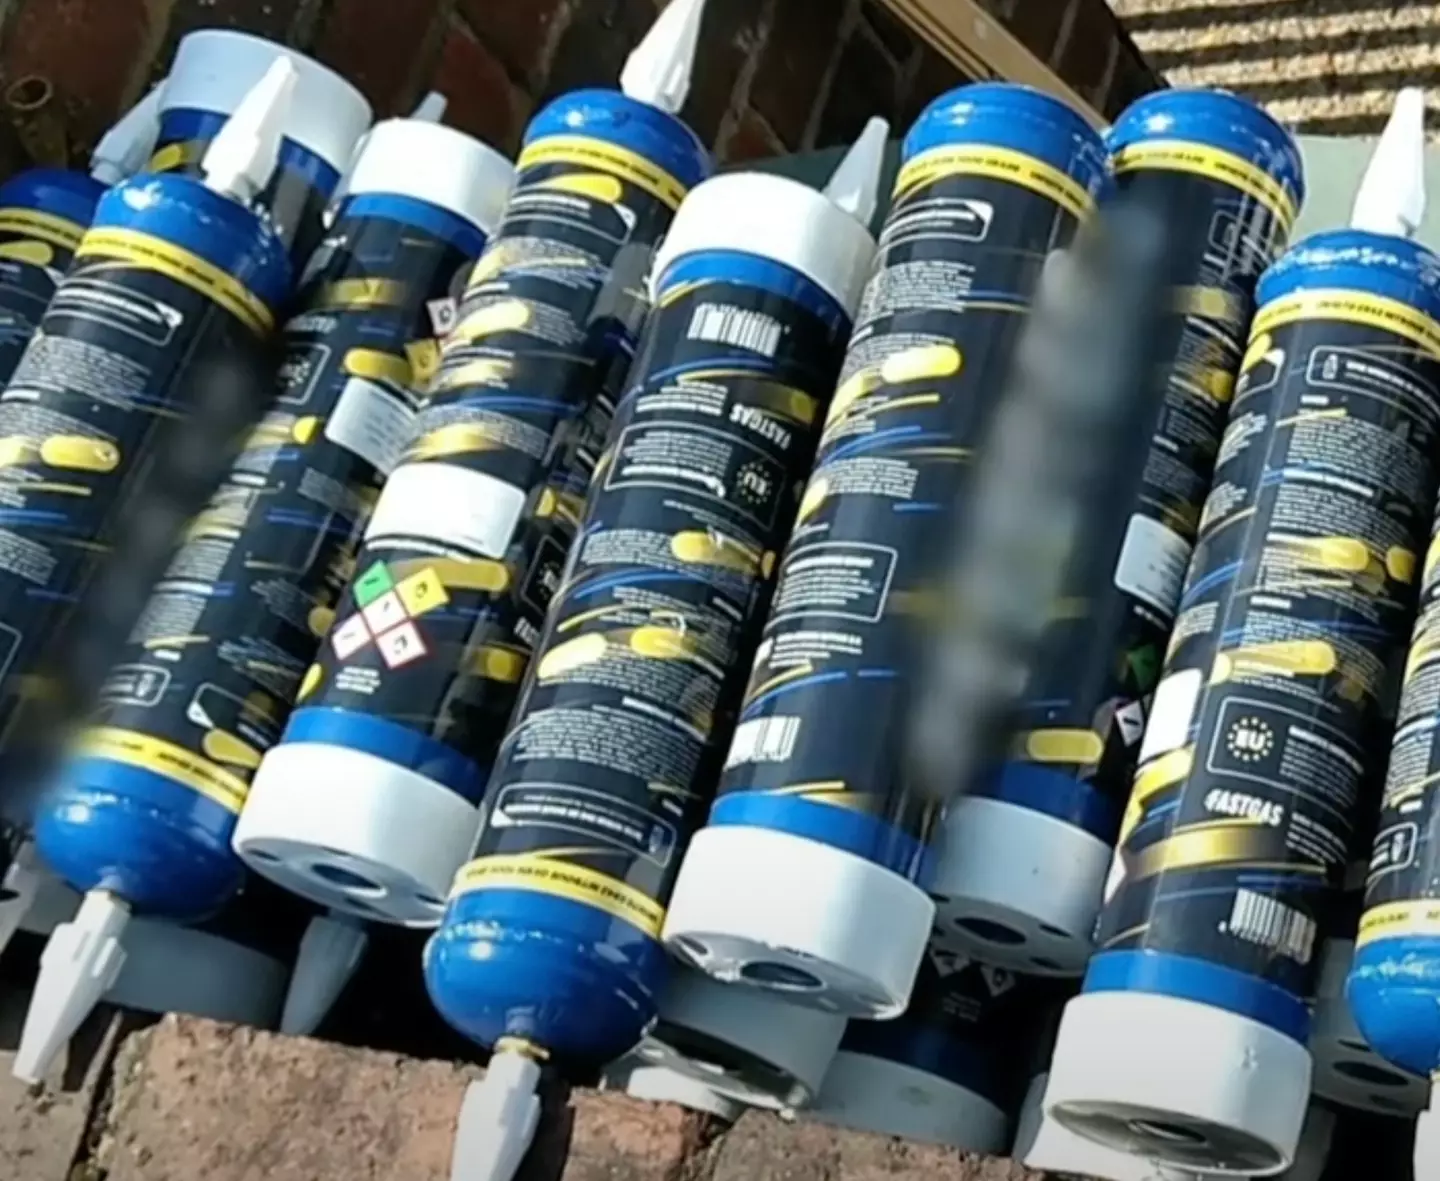 People are using supersized gas canisters.